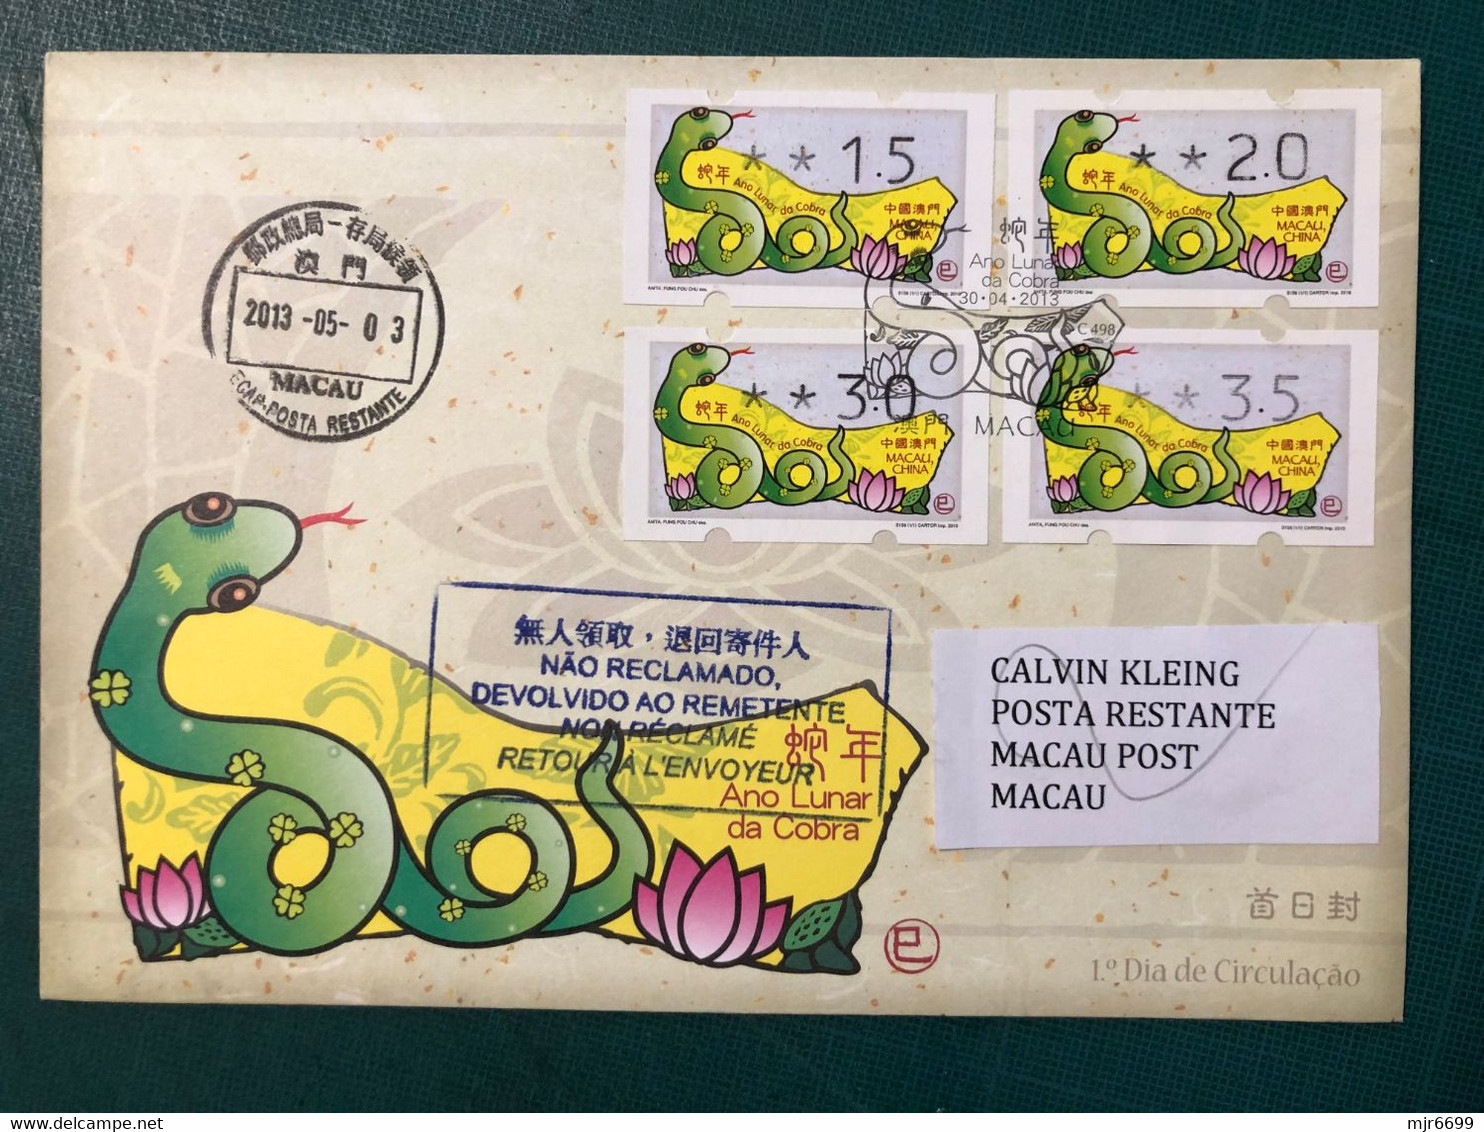 MACAU, 2013 ATM LABELS CHINESE ZODIAC YEAR OF THE SNAKE COMPLETE SET IN FDC LOCALLY REG USED - FDC